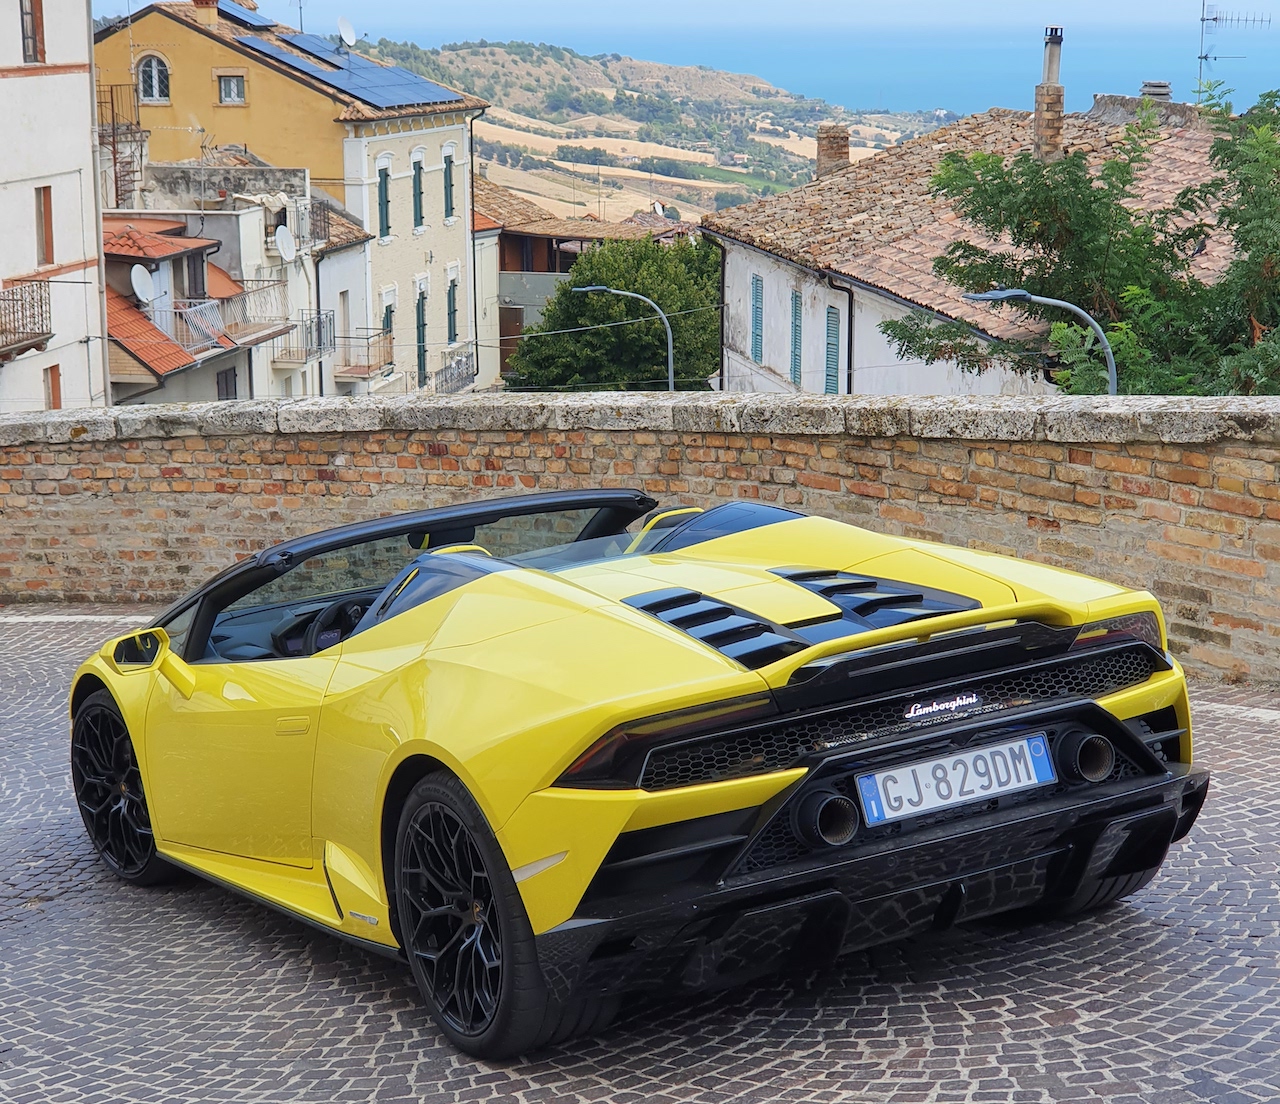 Auto journalist Cindy-Lou Dale tackles some of Italy’s most perilous roads behind the wheel of the Lamborghini Huracan Evo Spyder